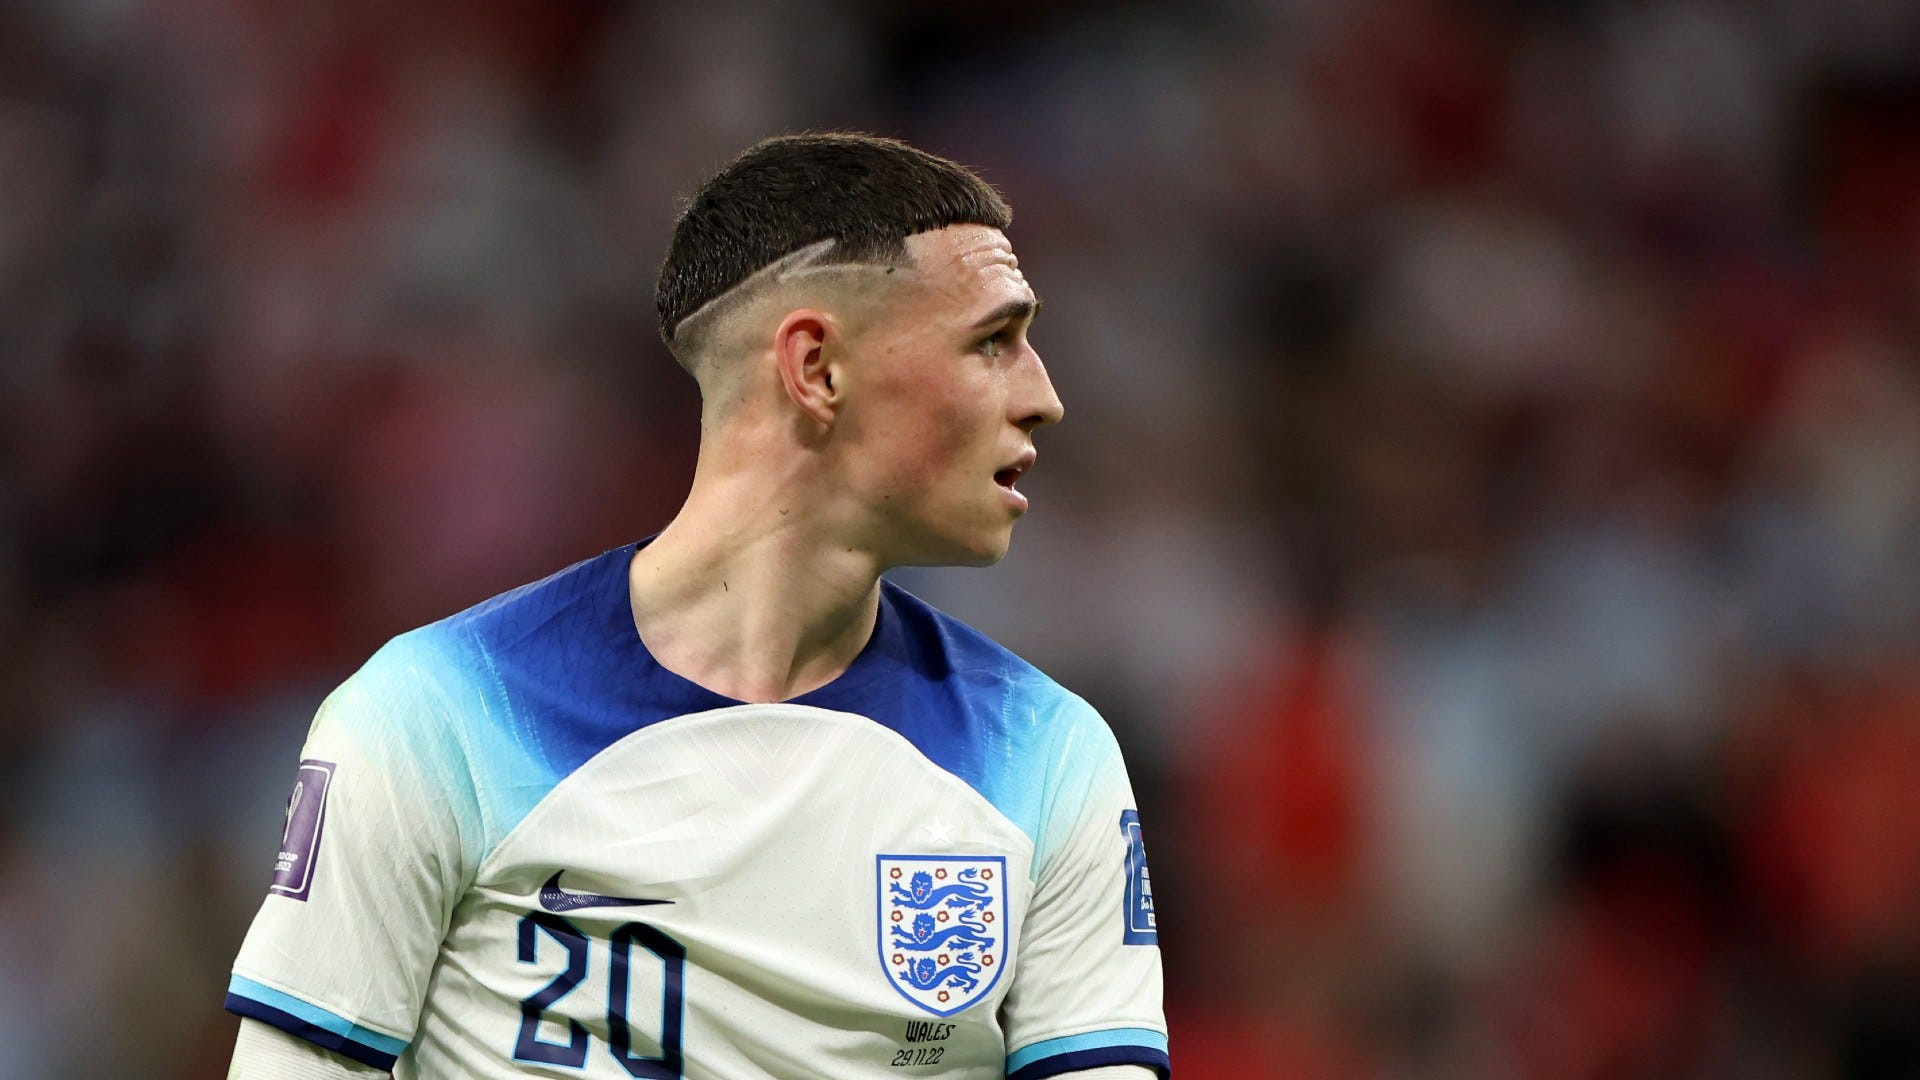 Foden skips Liverpool game after appendix removal